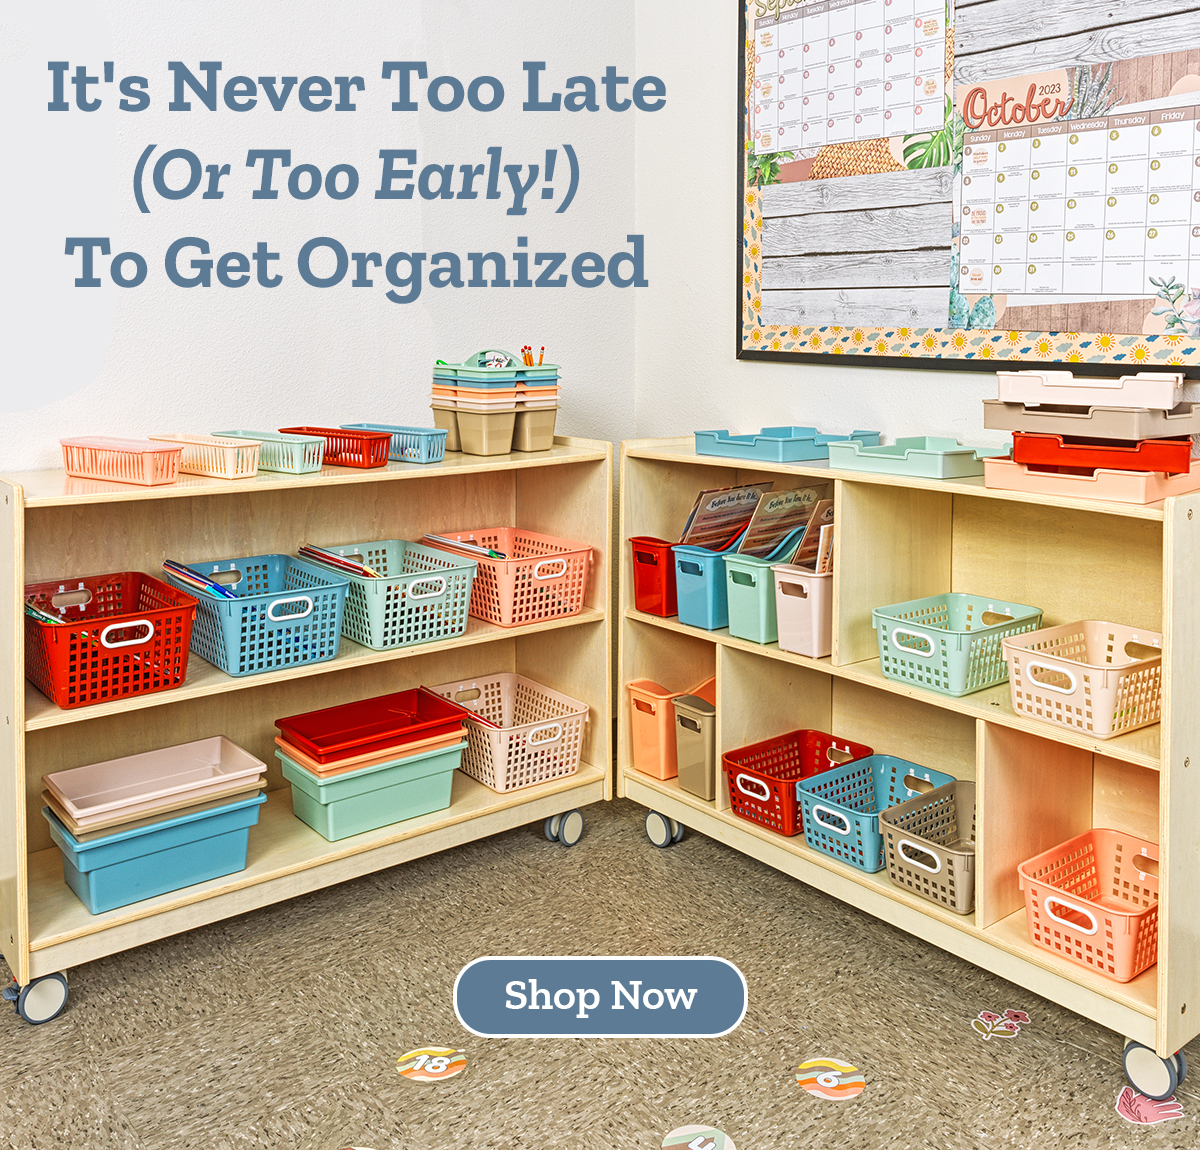 It's never too late (or too early!) to get organized